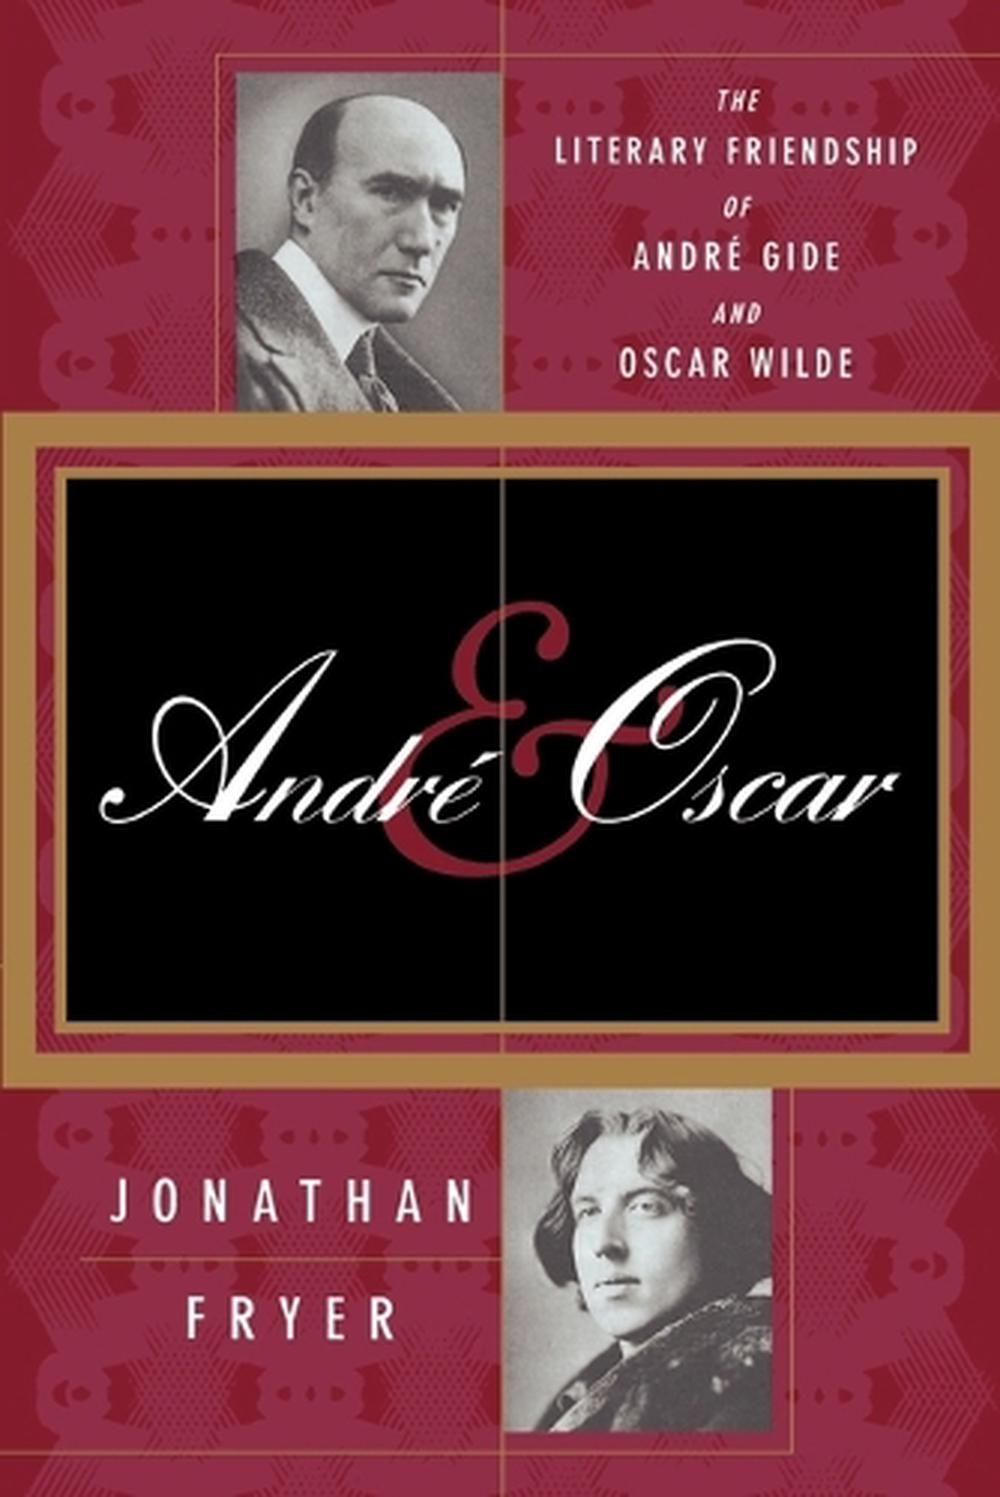 Andre and Oscar: The Literary Friendship of Andre Gide and Oscar Wilde ...